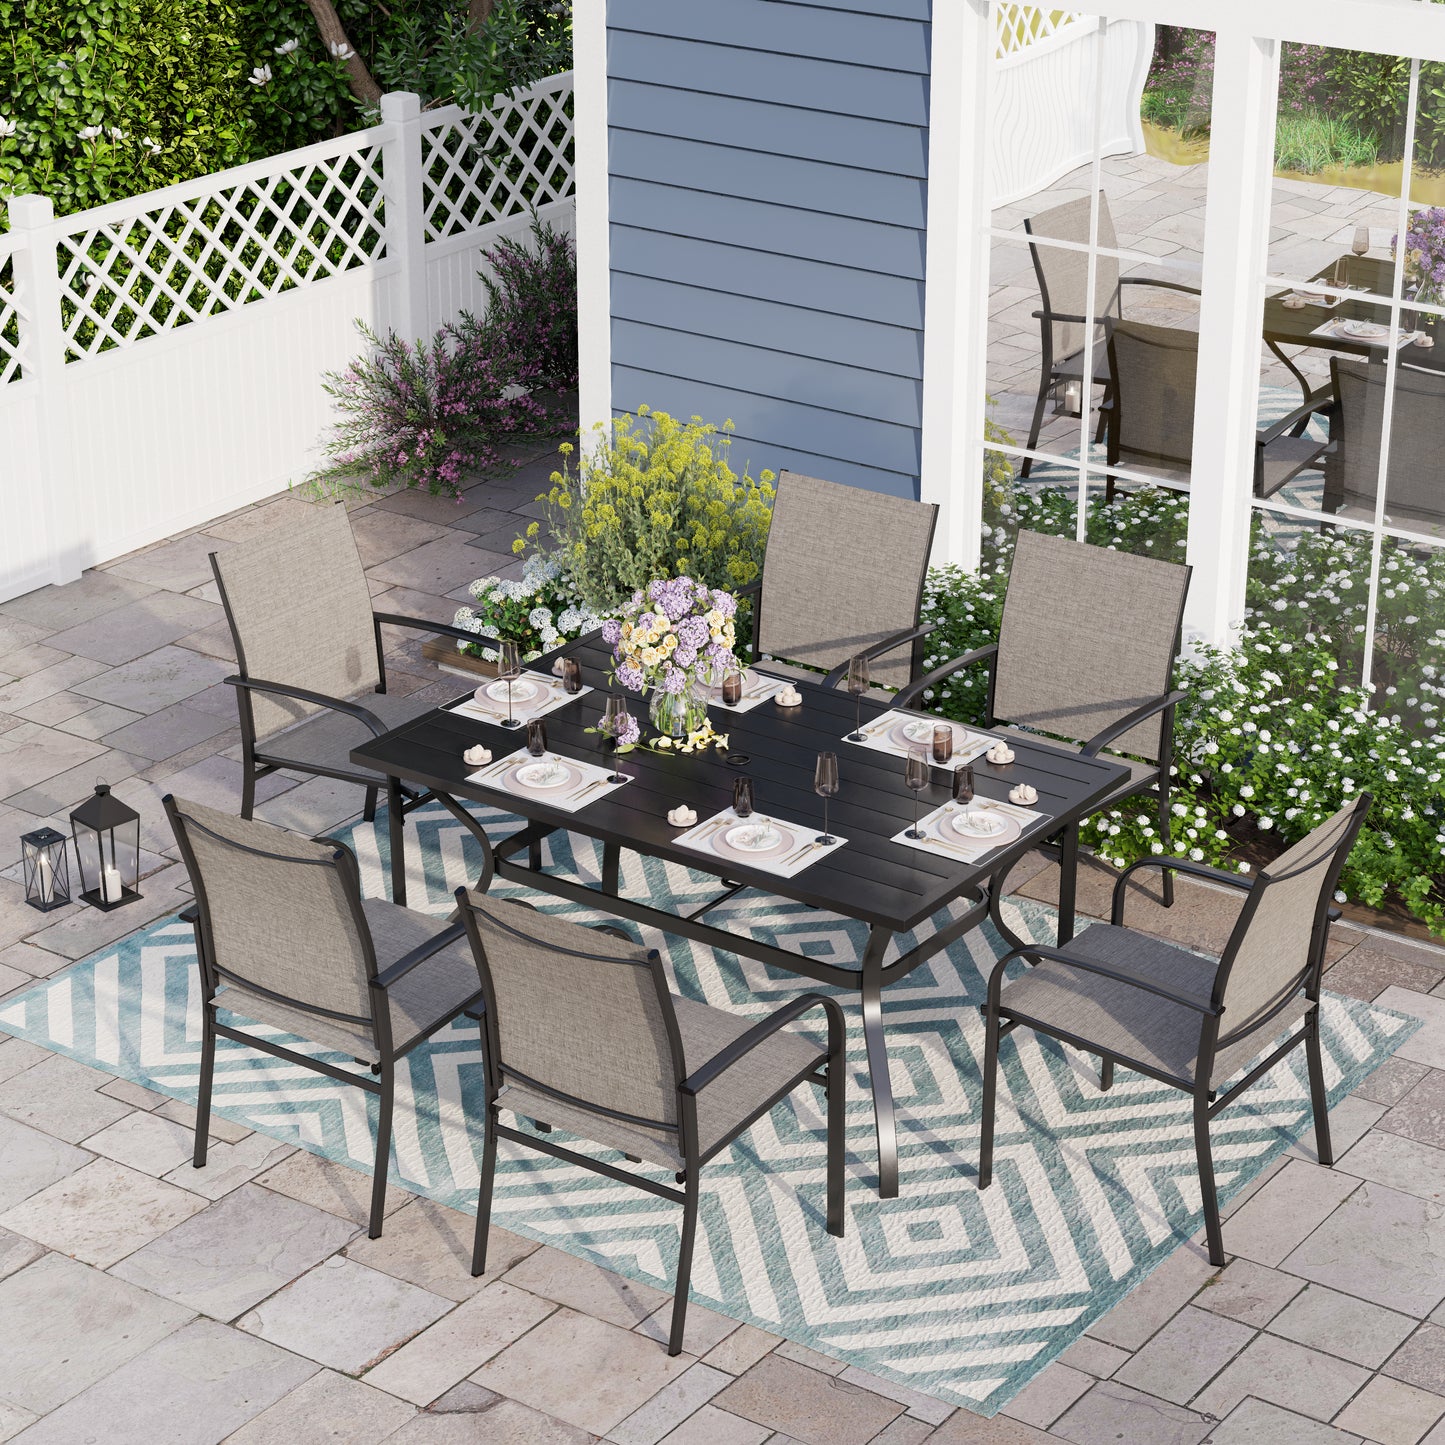 Sophia & William 7 Piece Patio Dining Set Rectangular Patio Dining Table and 6 Textilene Chairs - Brown